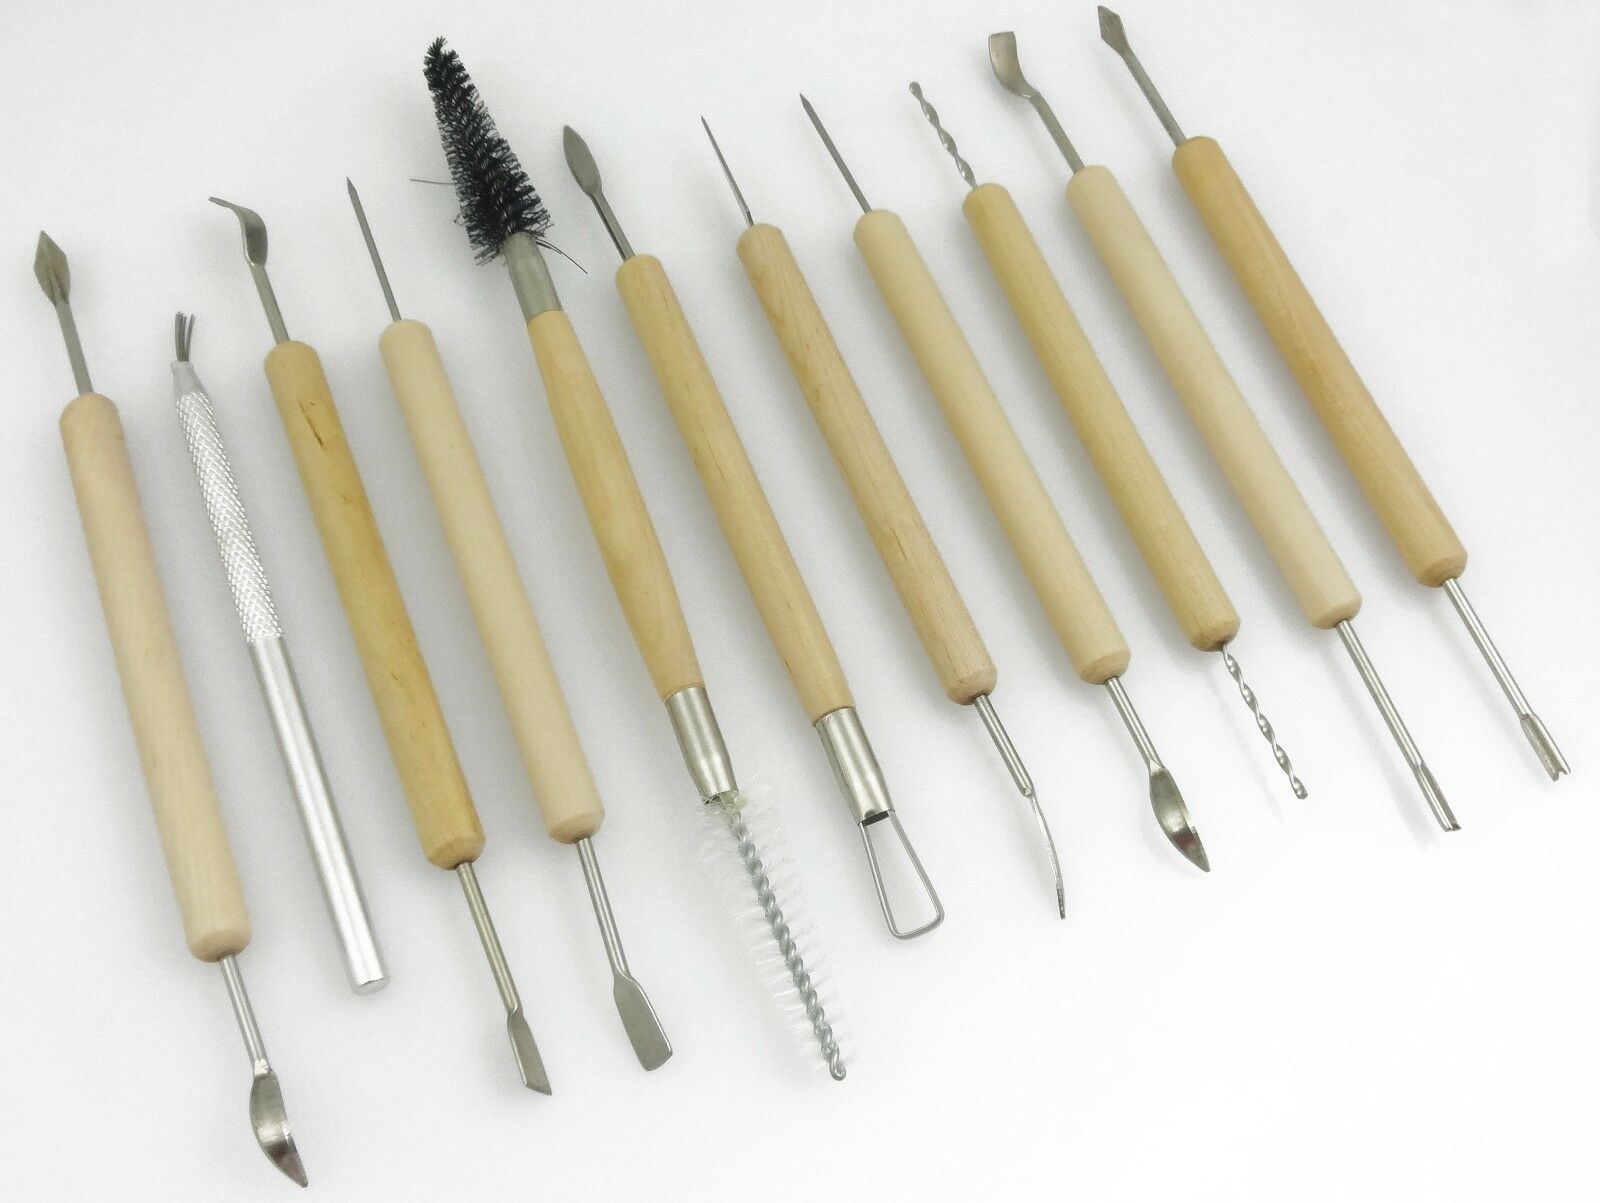 NEW 11pc Clay Sculpting Set Wax Carving Pottery Tools Shapers Polymer Modeling